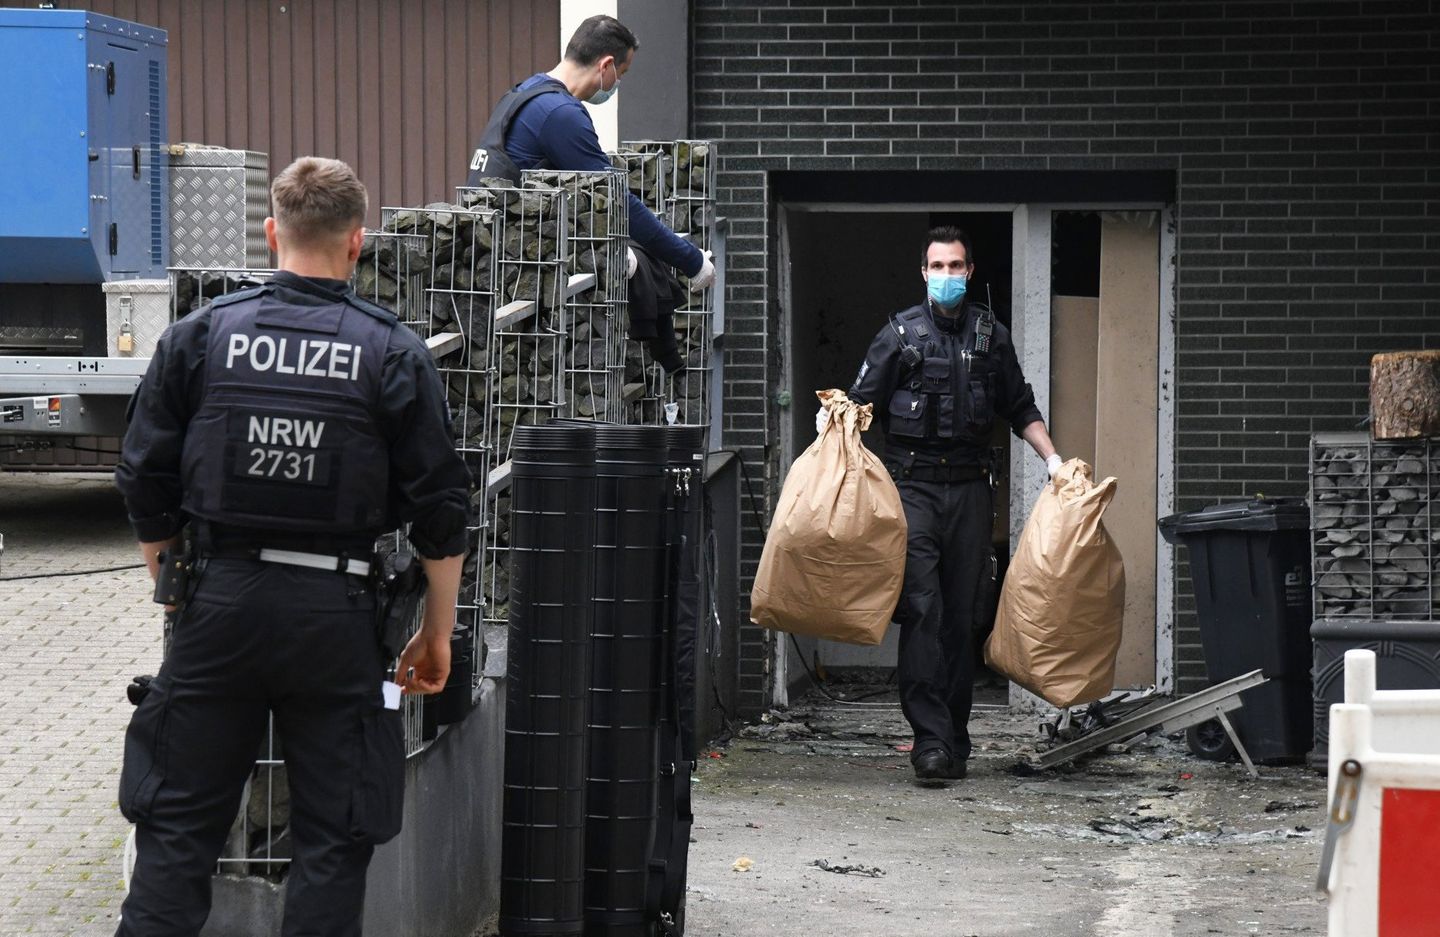 Caught in the trap: An office building was searched in Essen as part of the global campaign